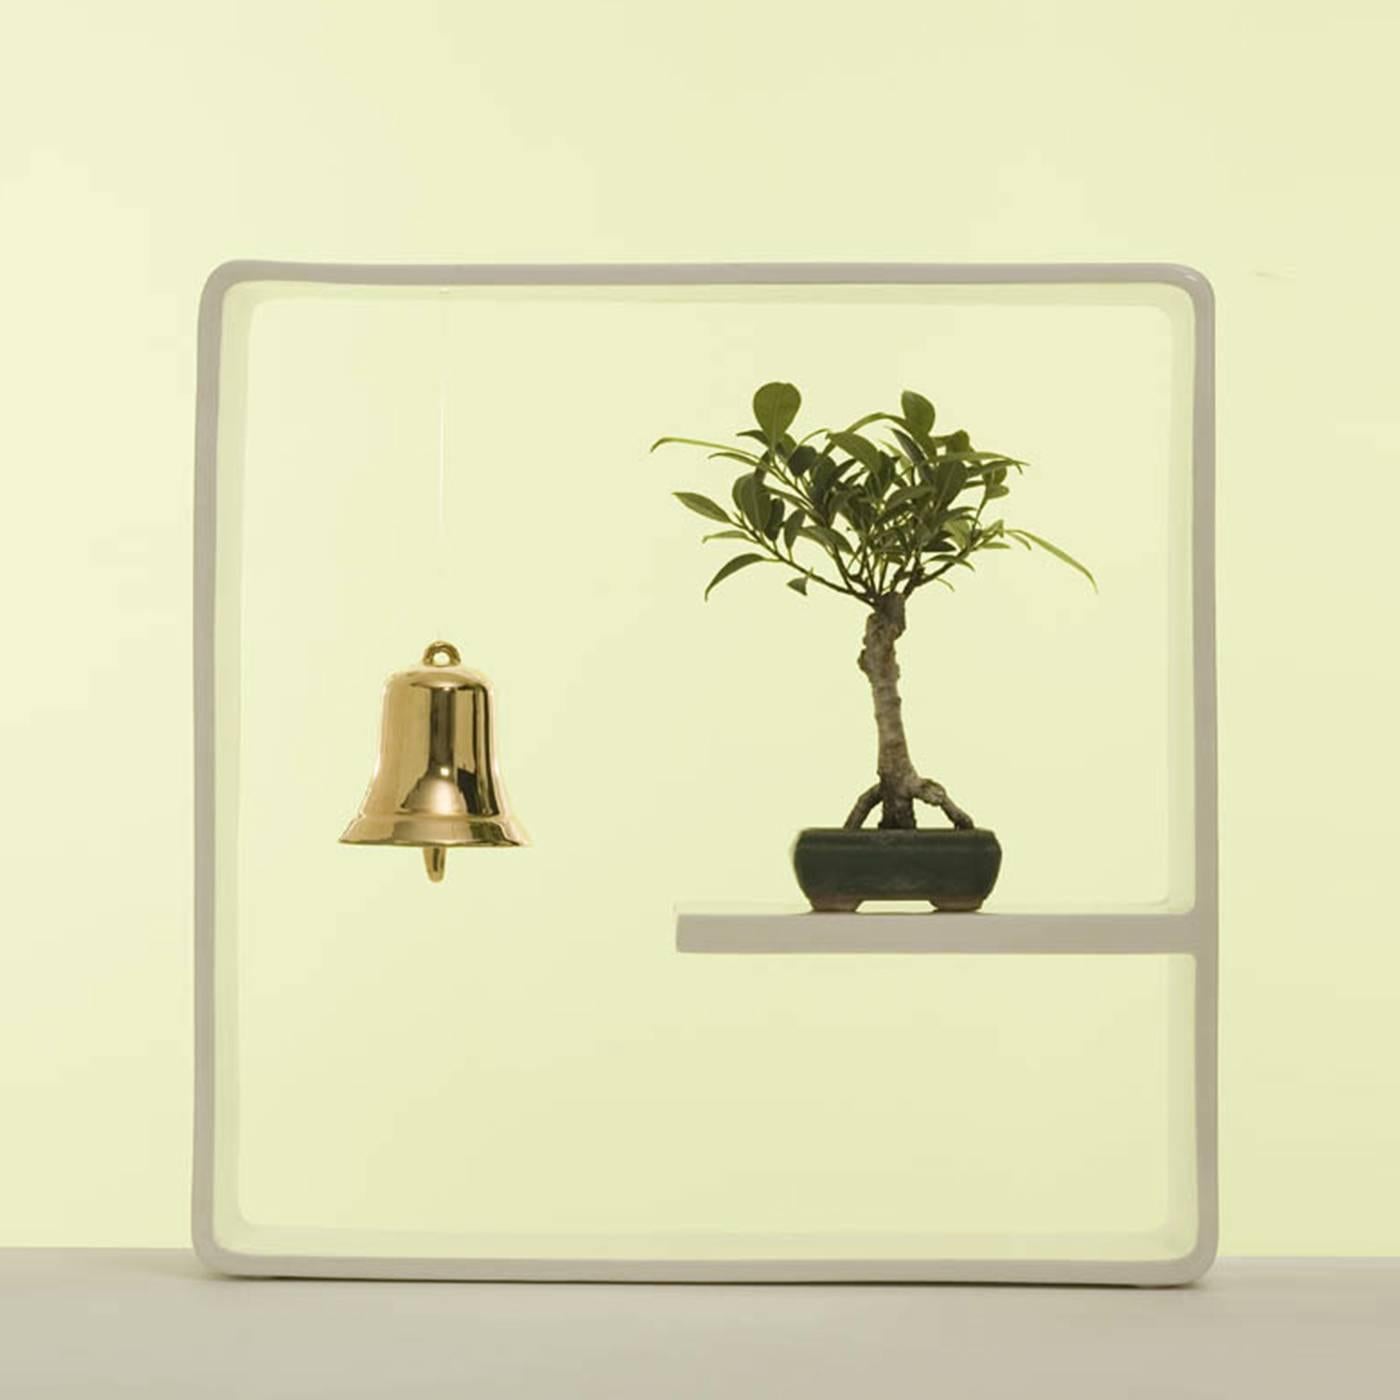 This elegant and playful vase is part of the Portali collection, of 18 designs by Andrea Branzi in which a white ceramic frame encapsulates a micro-garden consisting of one or more elements to display flower arrangements. In this case, a single